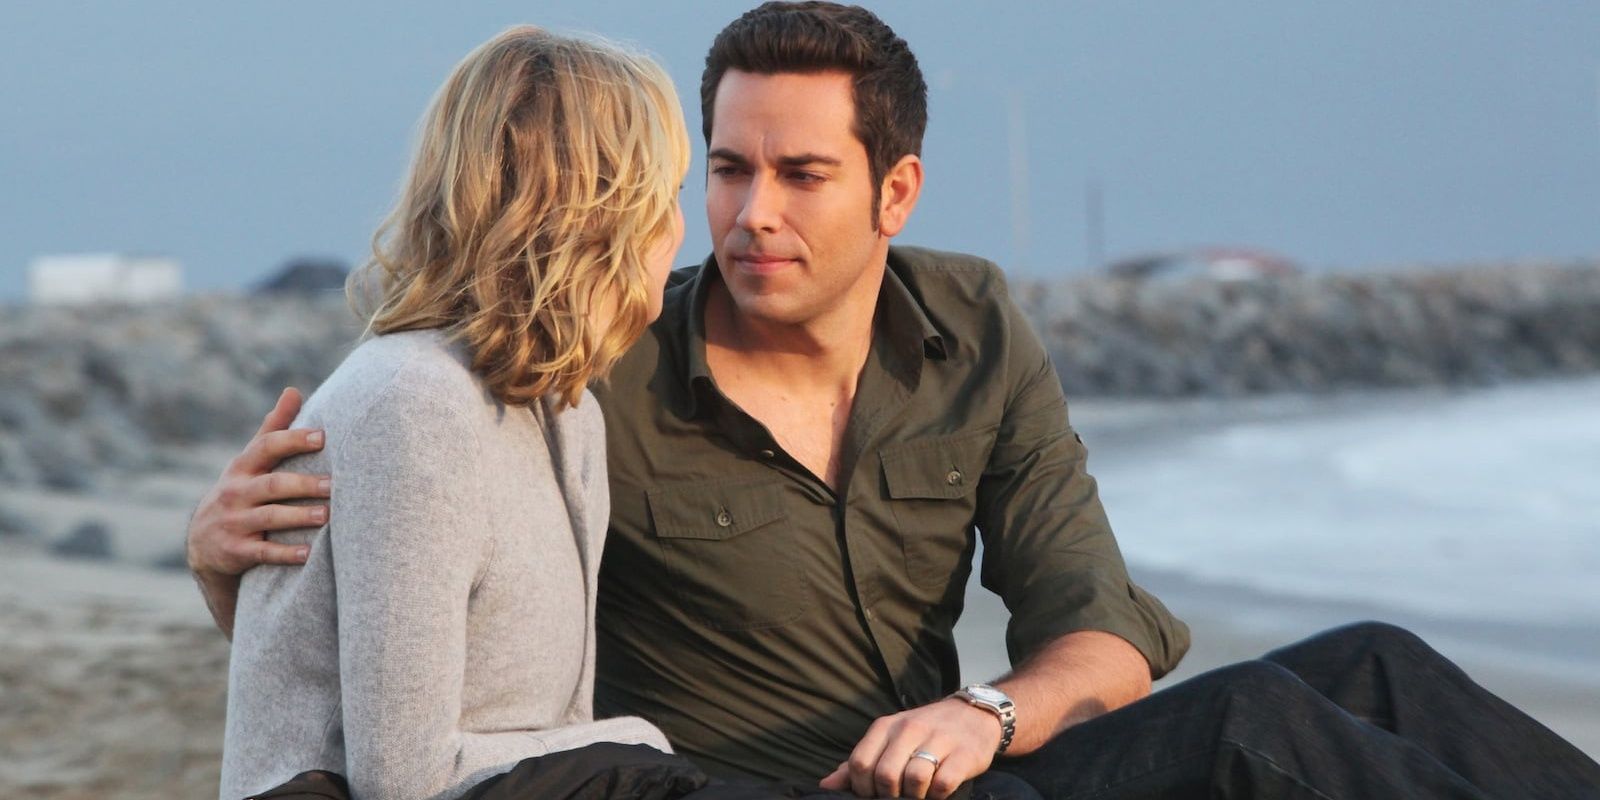 Chuck and Sarah sit on the beach together